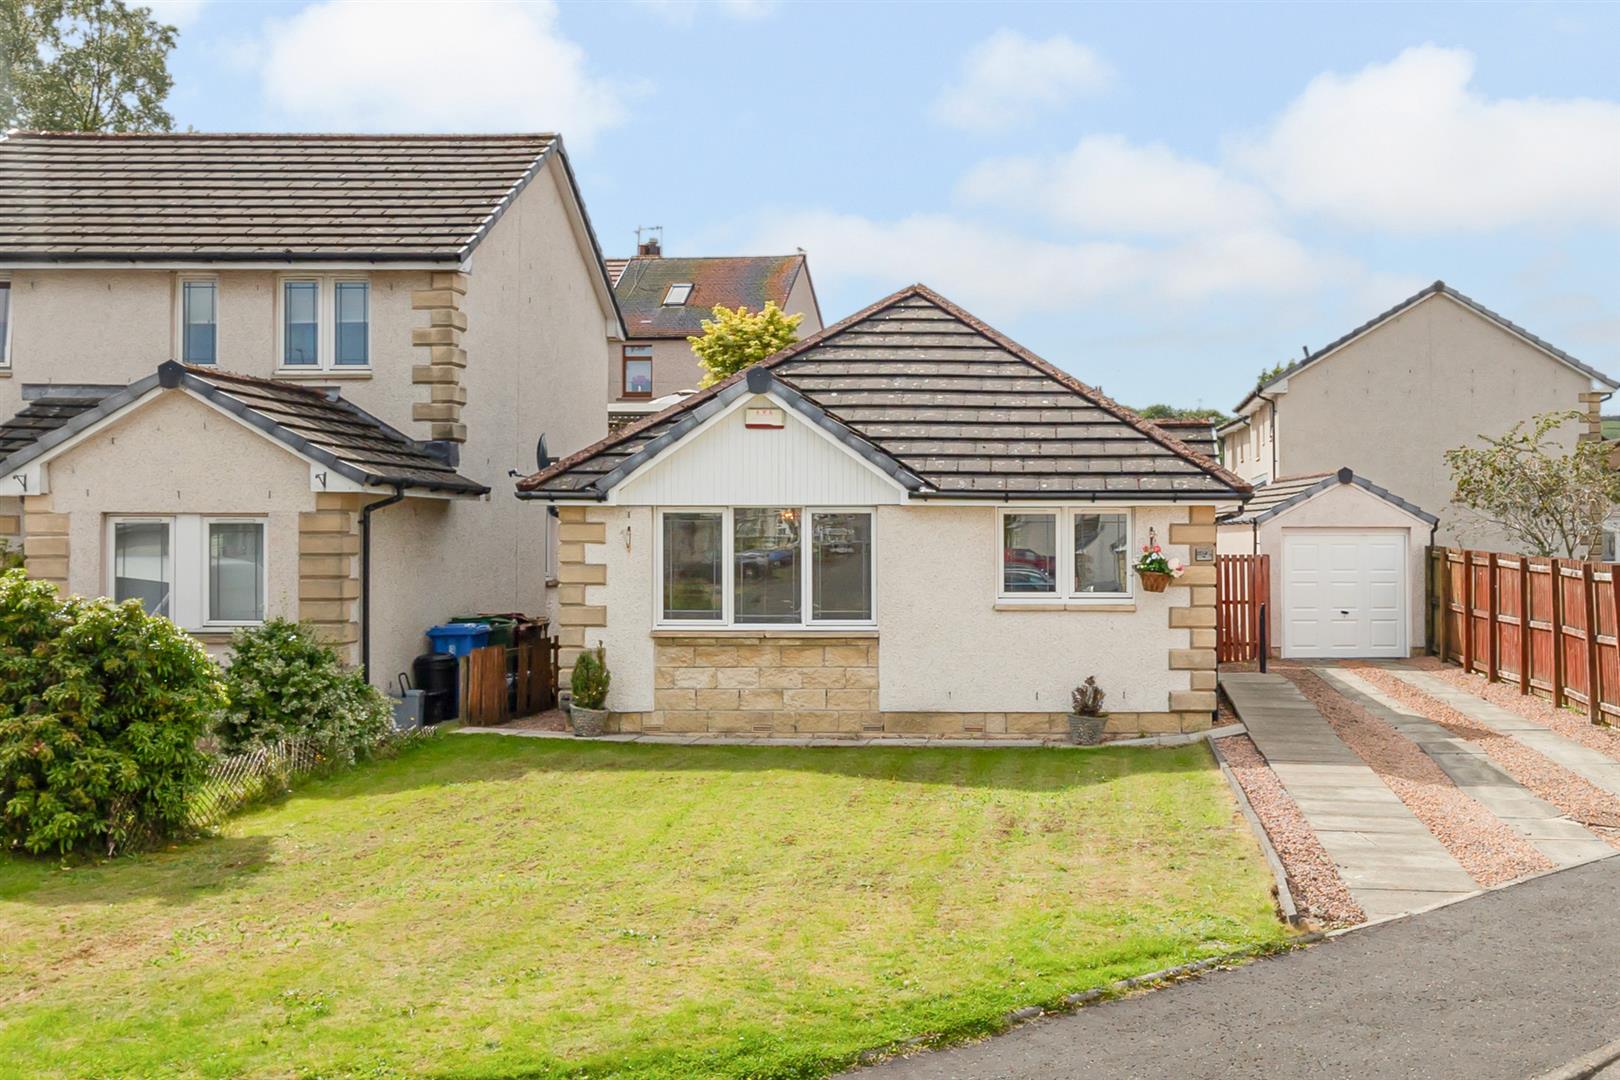 3 bed bungalow for sale in Connolly Drive, Denny - Property Image 1